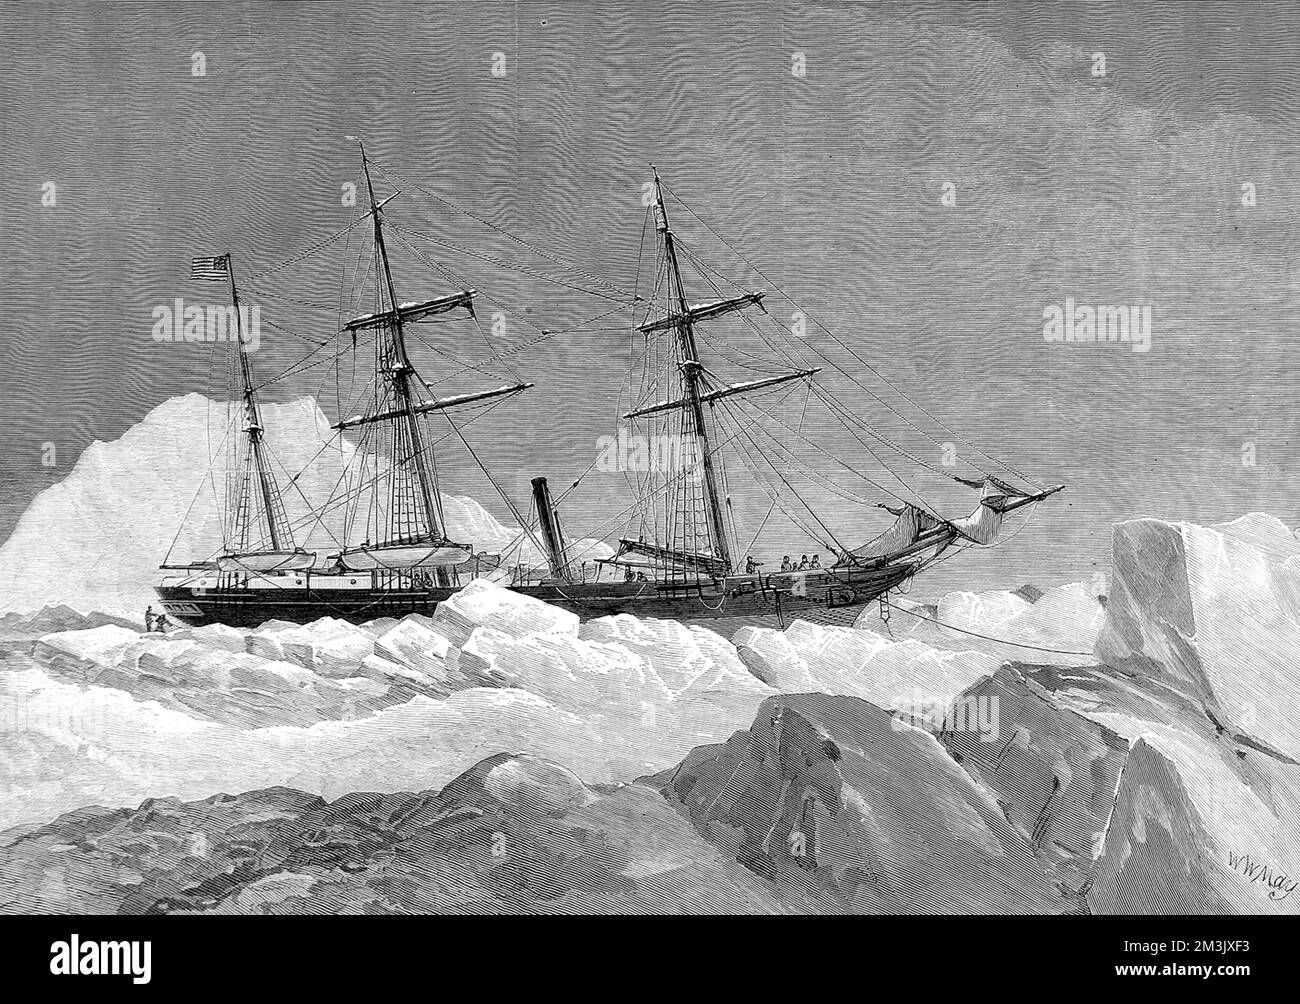 The yacht 'Jeannette' in the Arctic pack ice, during the expedition of 1879-1881.   An US Navy crew, led by Lieutenant Commander George Washington Delong, embarked aboard the private yacht 'Jeannnette' in 1879 in an attempt to sail to the North Pole. The 'Jeannette' entered the ice pack, near Wrangell Island, in September 1879 and then drifted north-west, surrounded by ice until June 1881.  On the 12th June 1881, the 'Jeannette' was crushed by the ice and sank, leaving its crew 700 miles from the nearest human habitation, at the Lena River Delta, Siberia. The crew of the 'Jeannette' Stock Photo